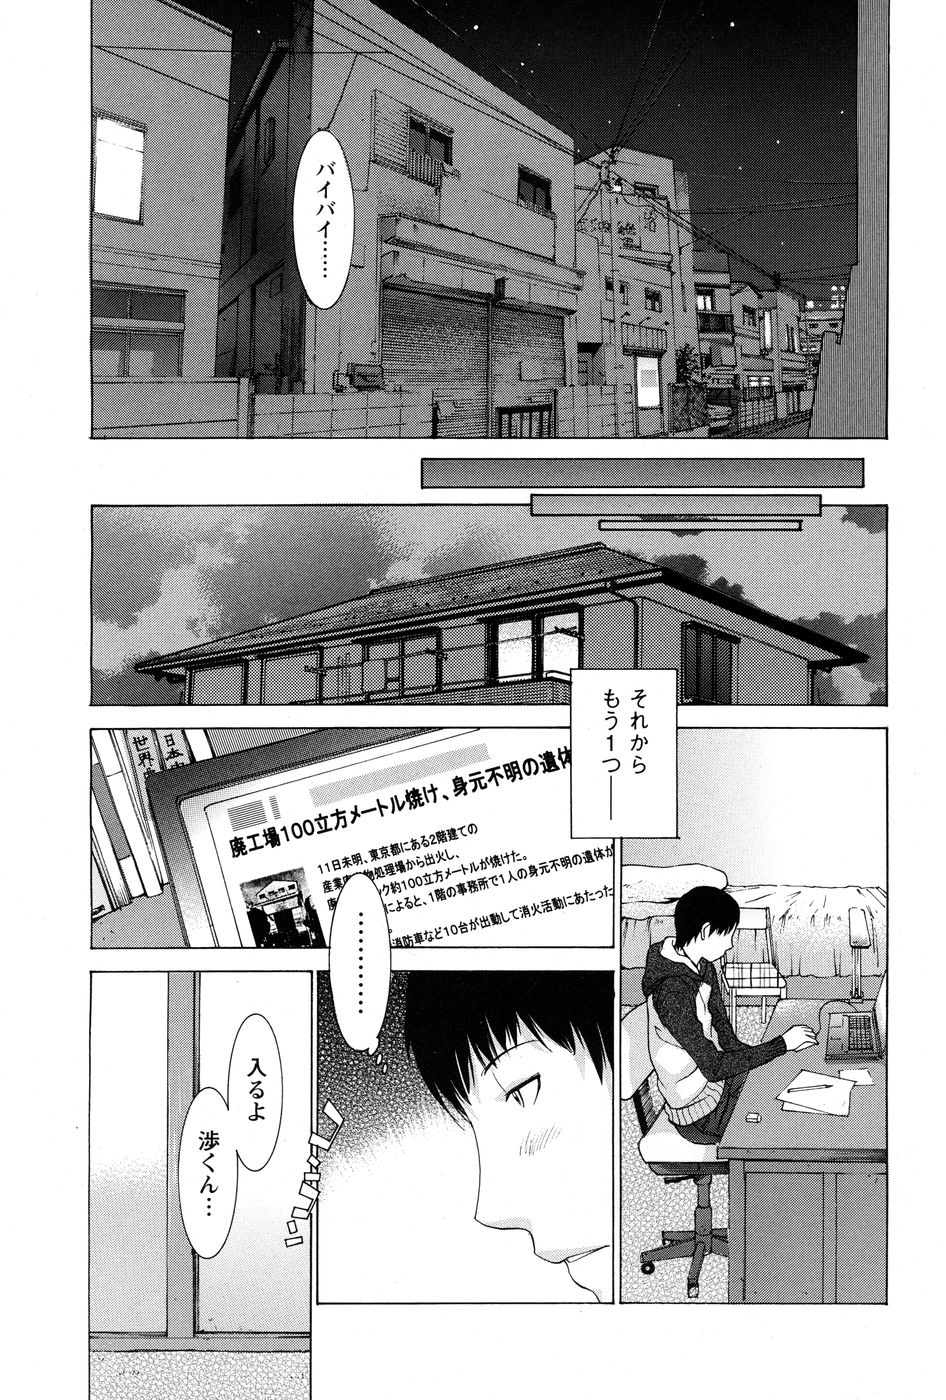 Men's Young Special Ikazuchi 2010-06 Vol. 14 page 48 full